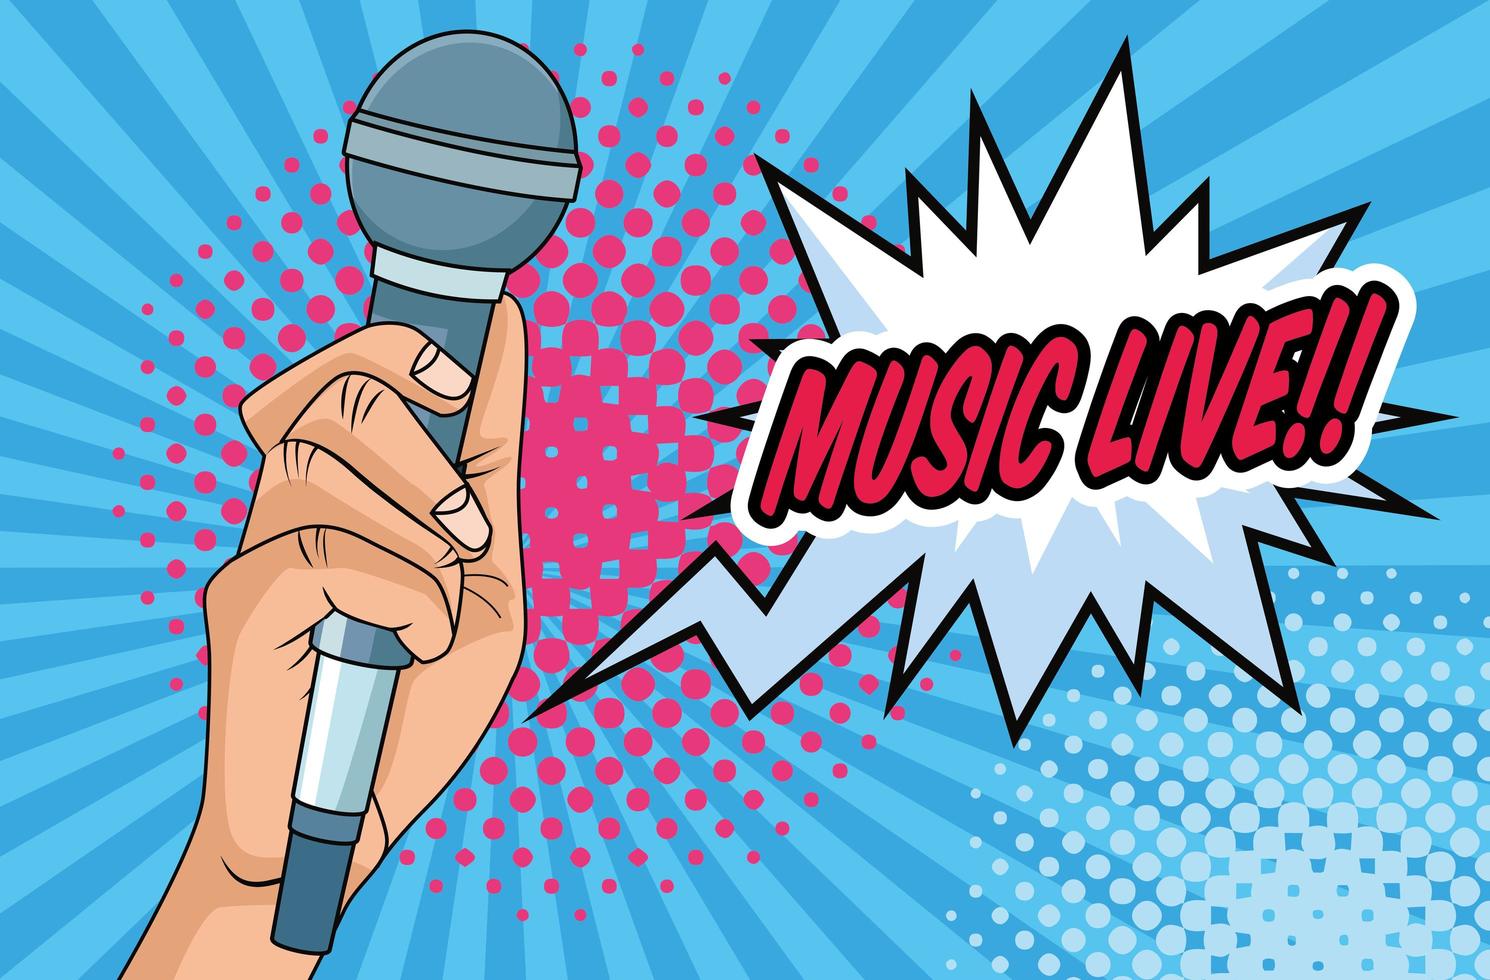 hand human with microphone and speech bubble pop art style vector